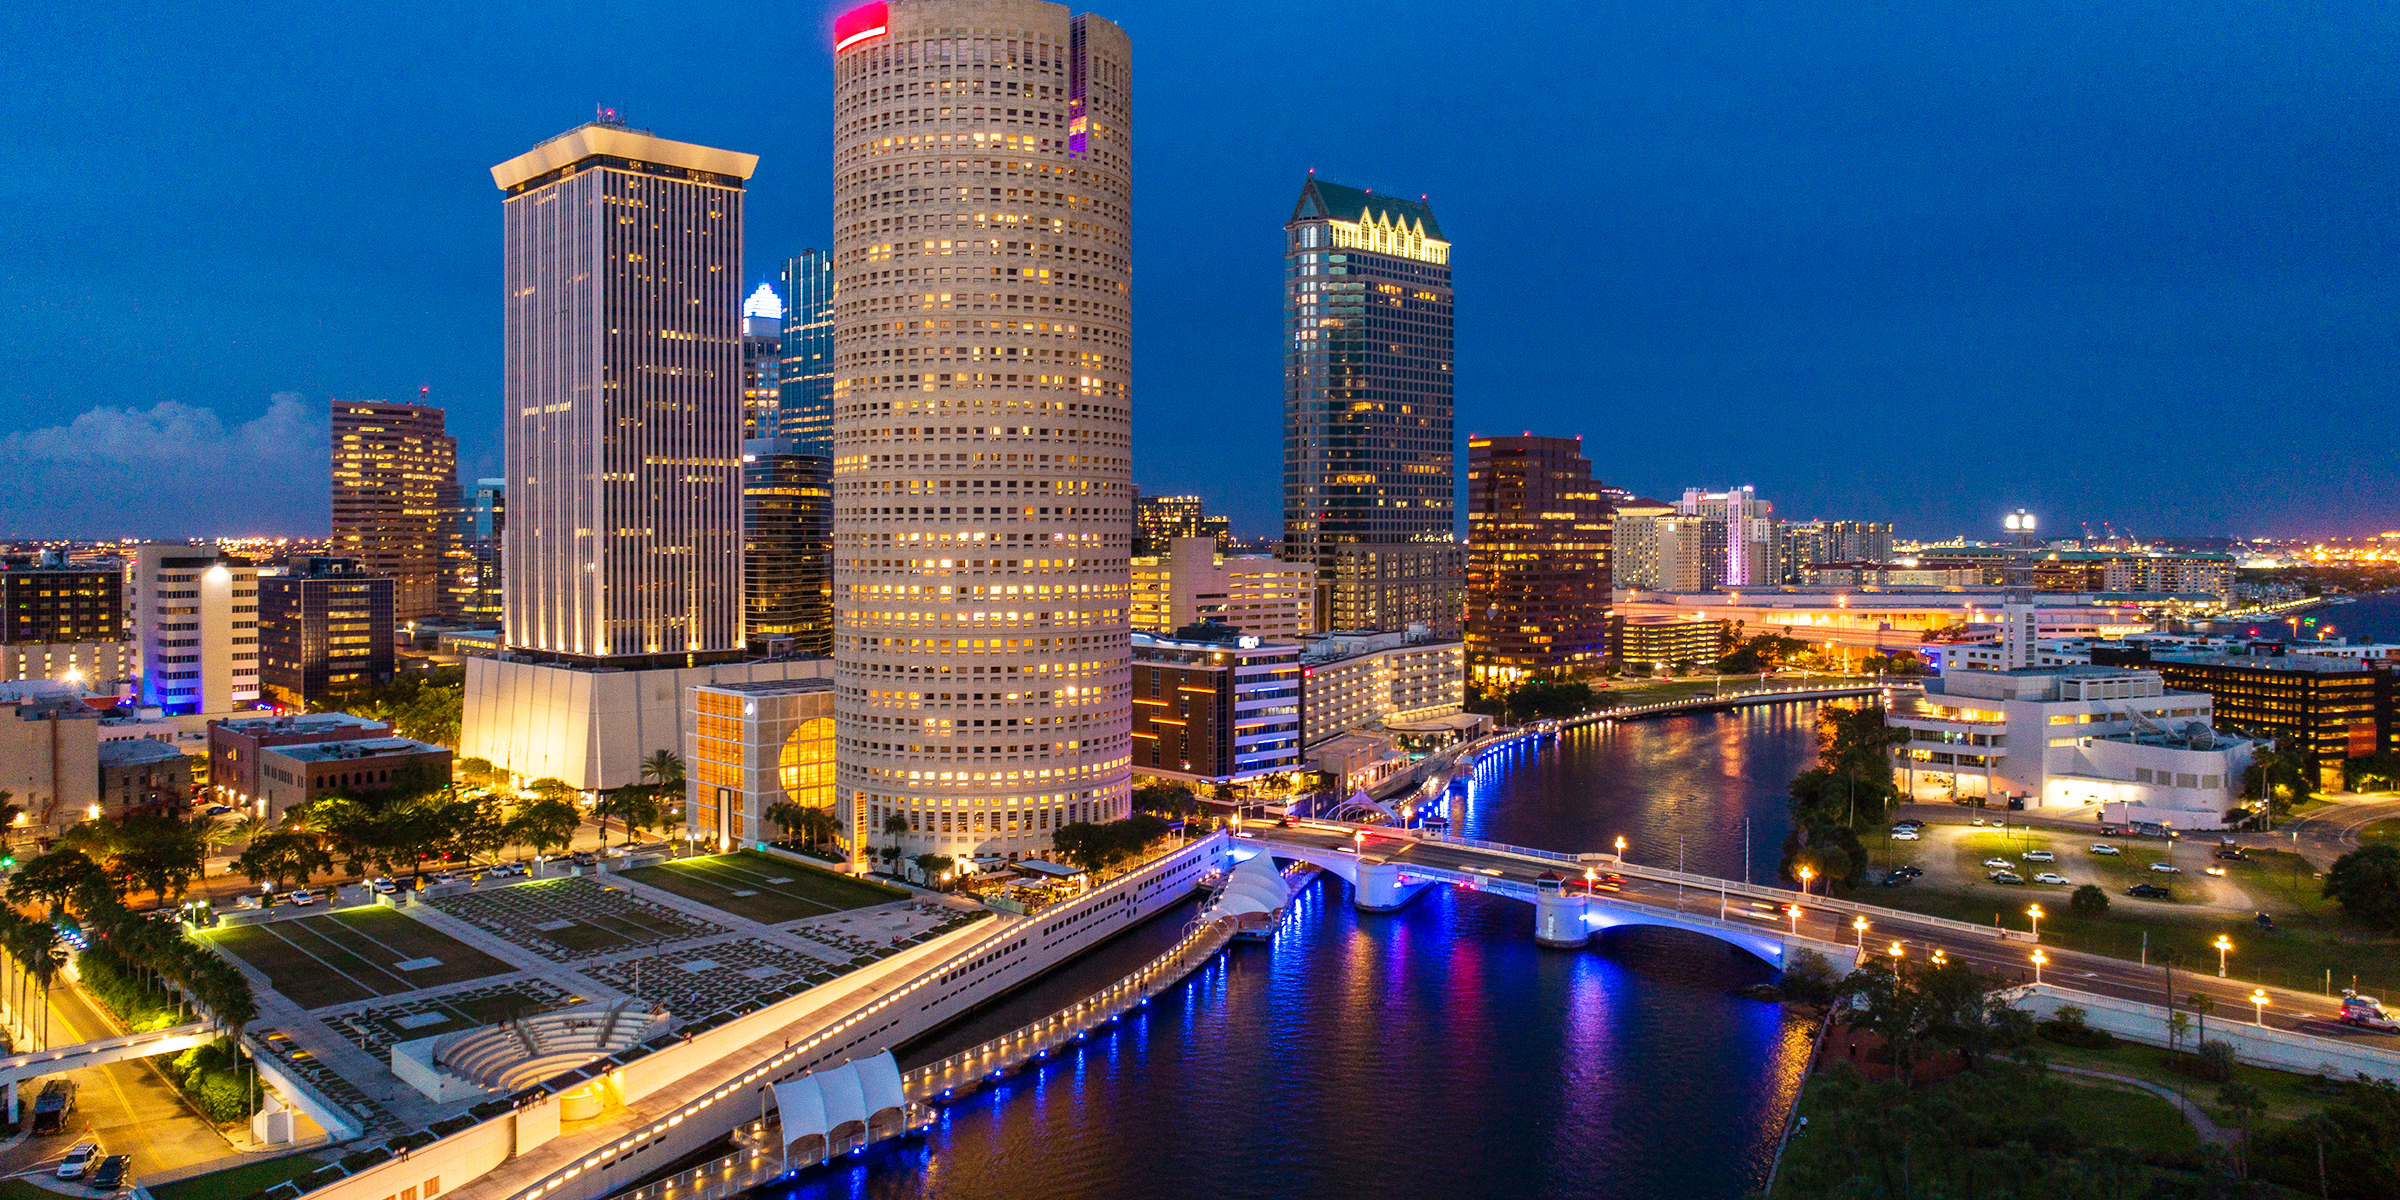 Tampa skyline | Source: Getty Images